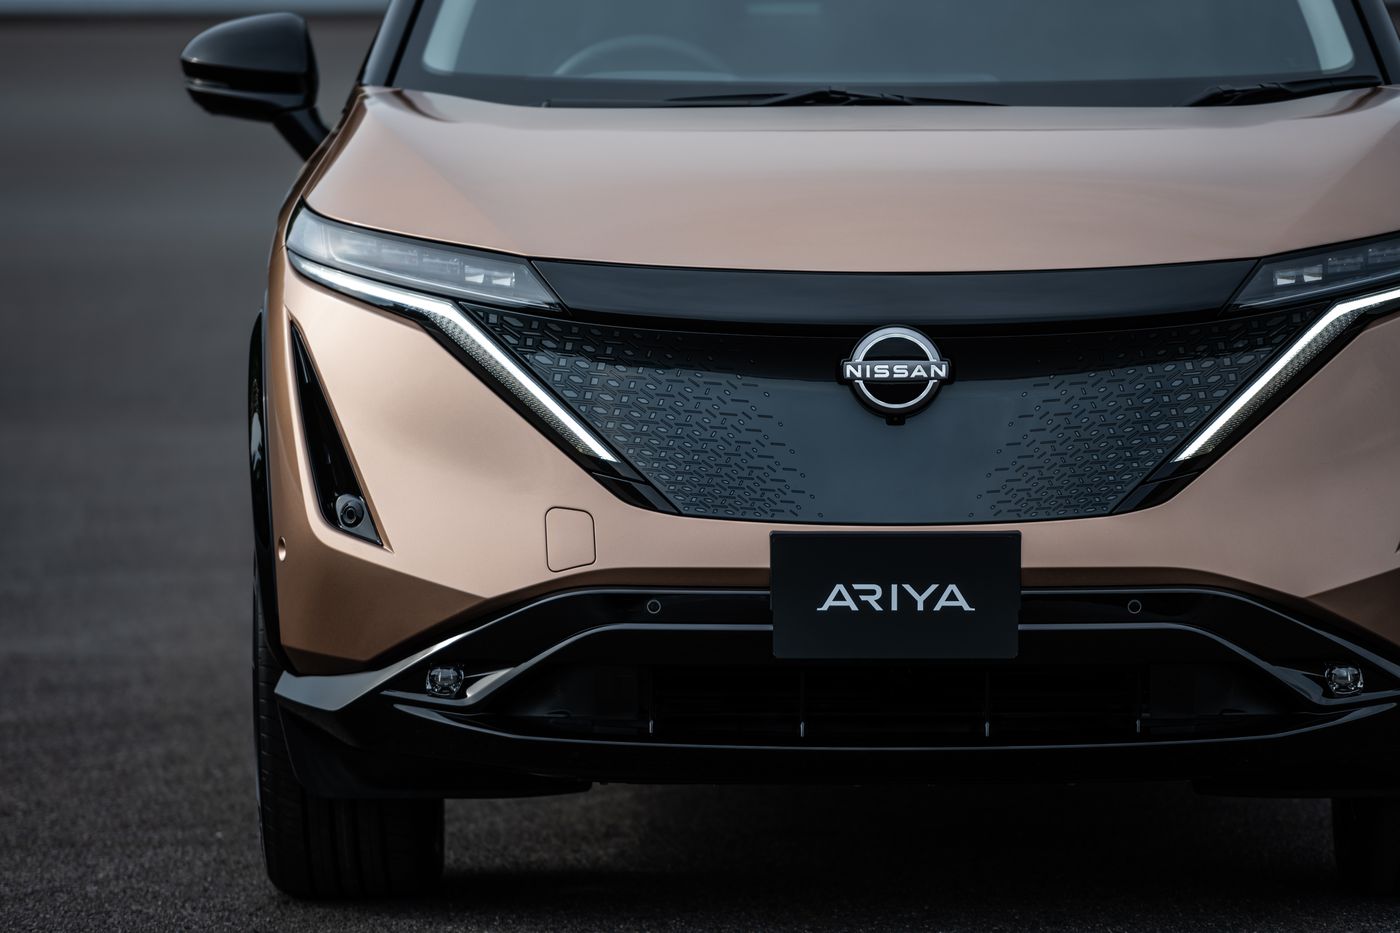 Nissan Ariya electric crossover SUV unveiled with up to 300 miles